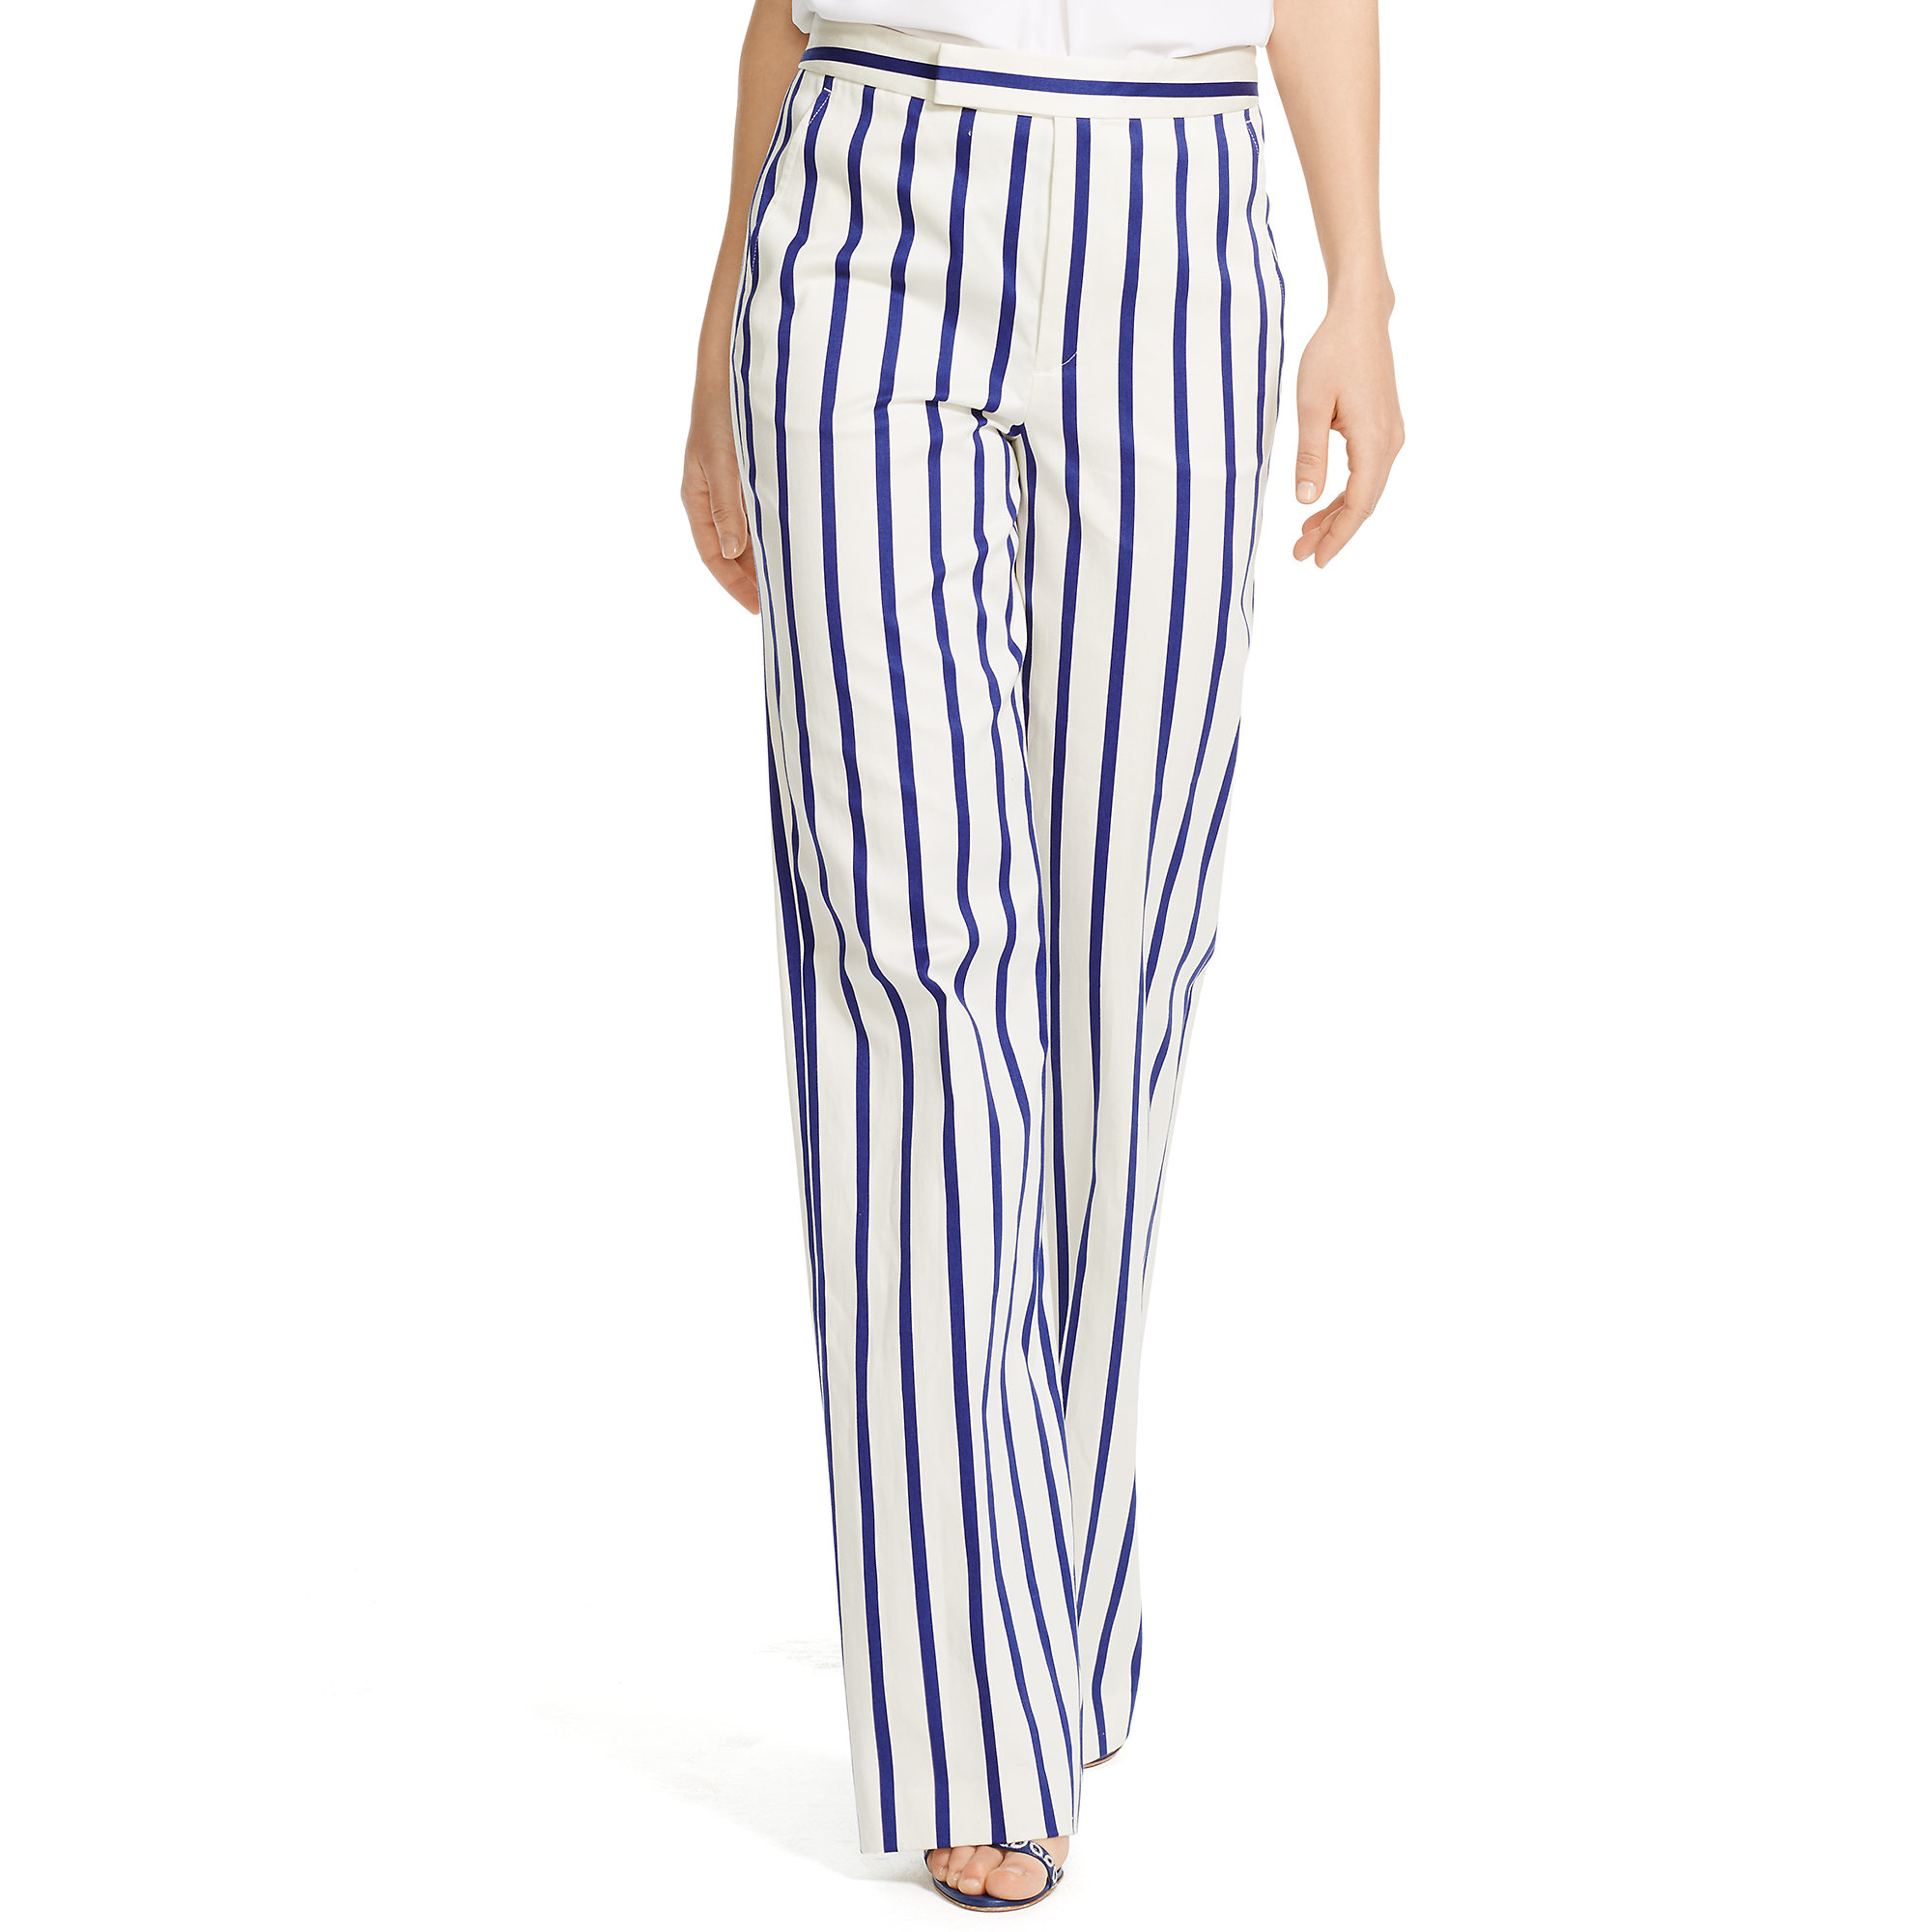 Lyst - Polo Ralph Lauren Striped Wide-leg Pant in White